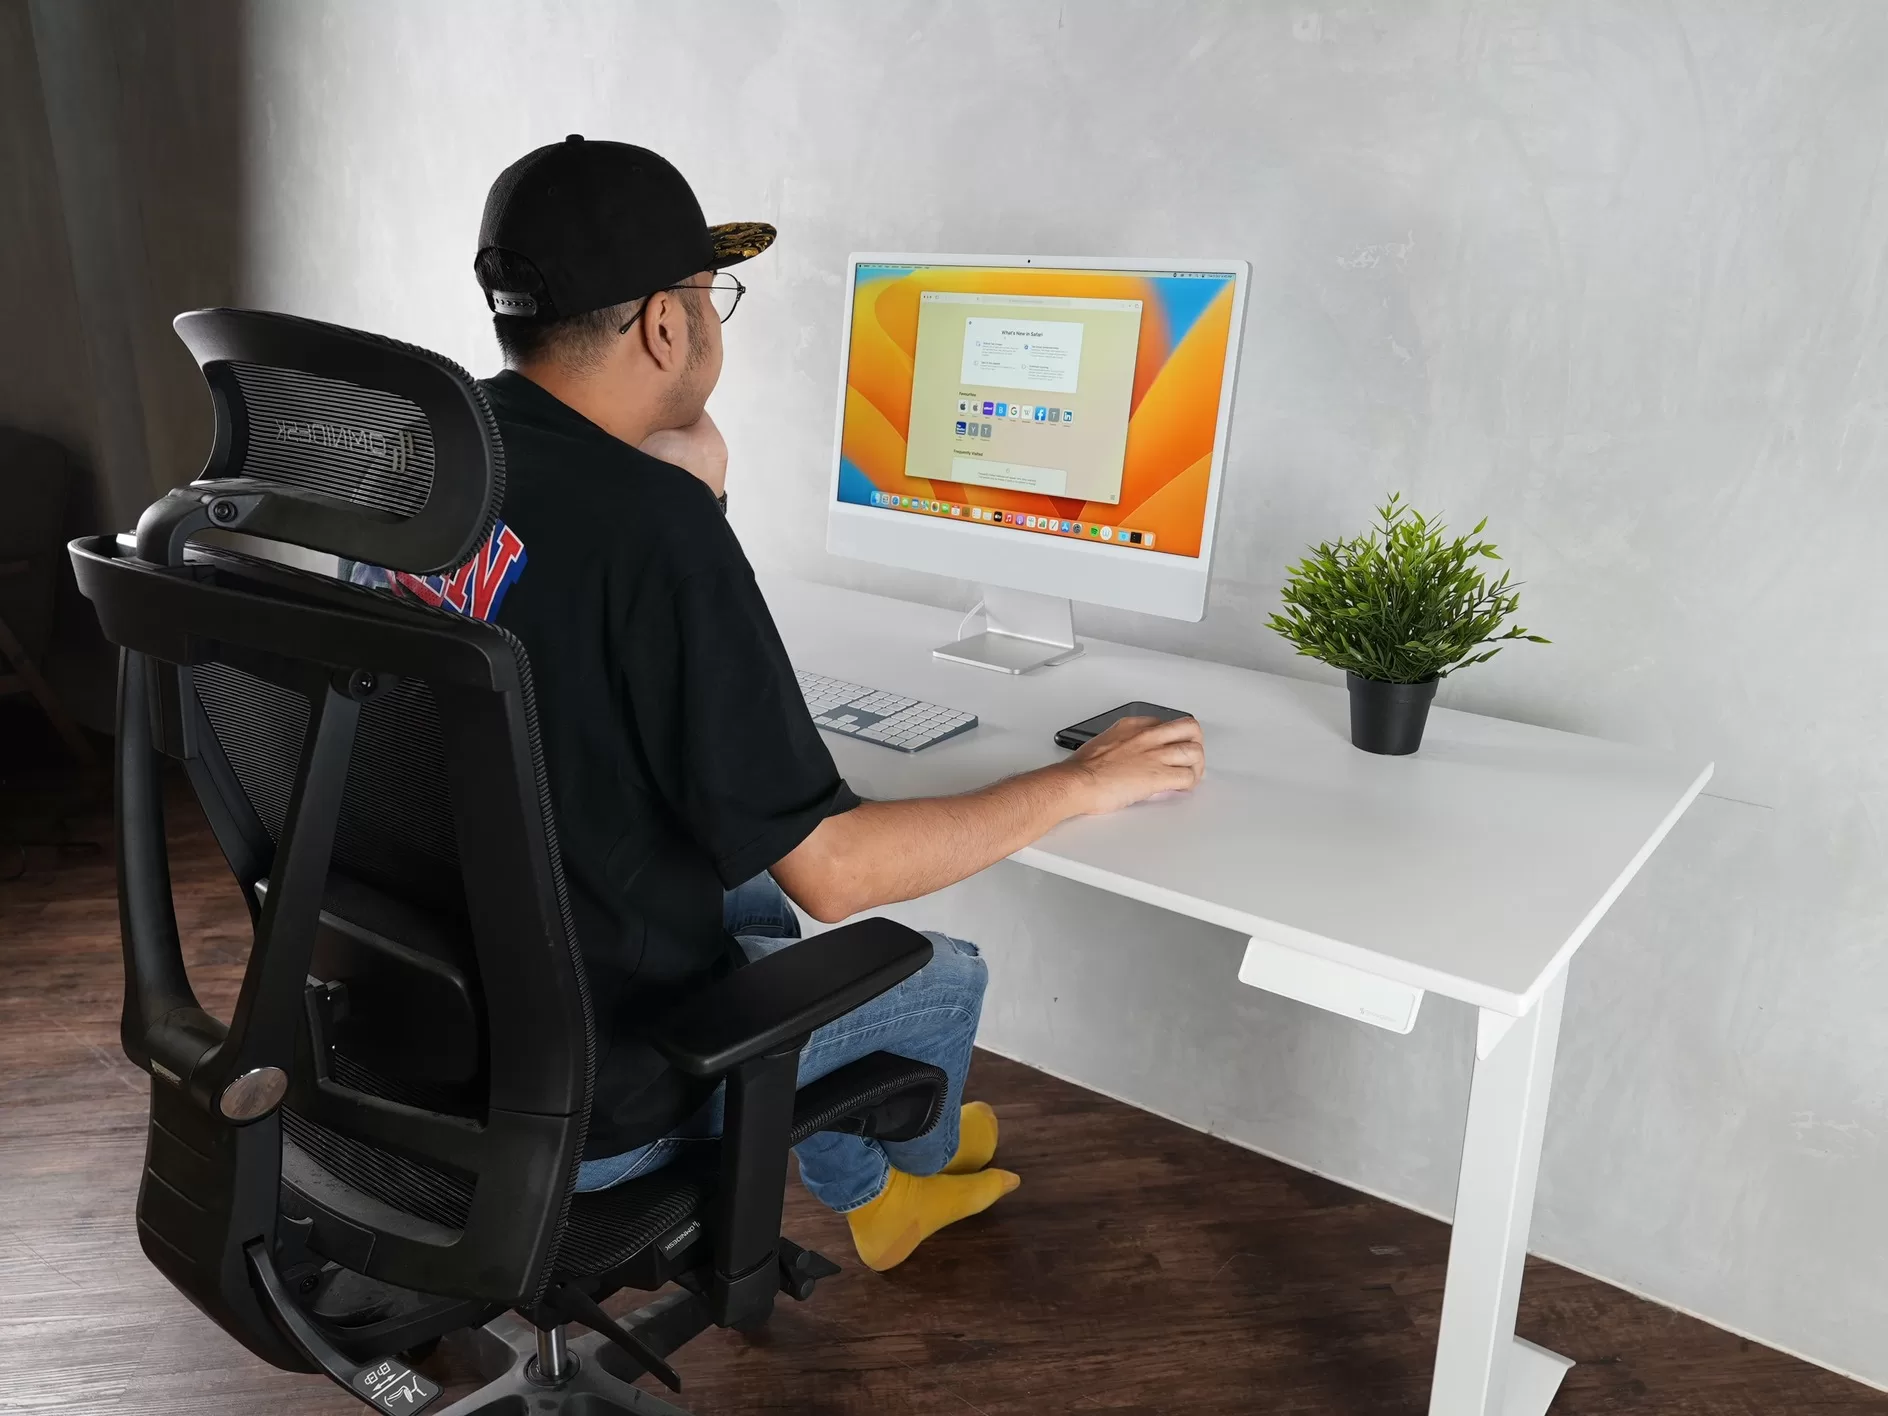 Check Out These Gaming Accessories To Make Your Desk Your Own! - Omnidesk